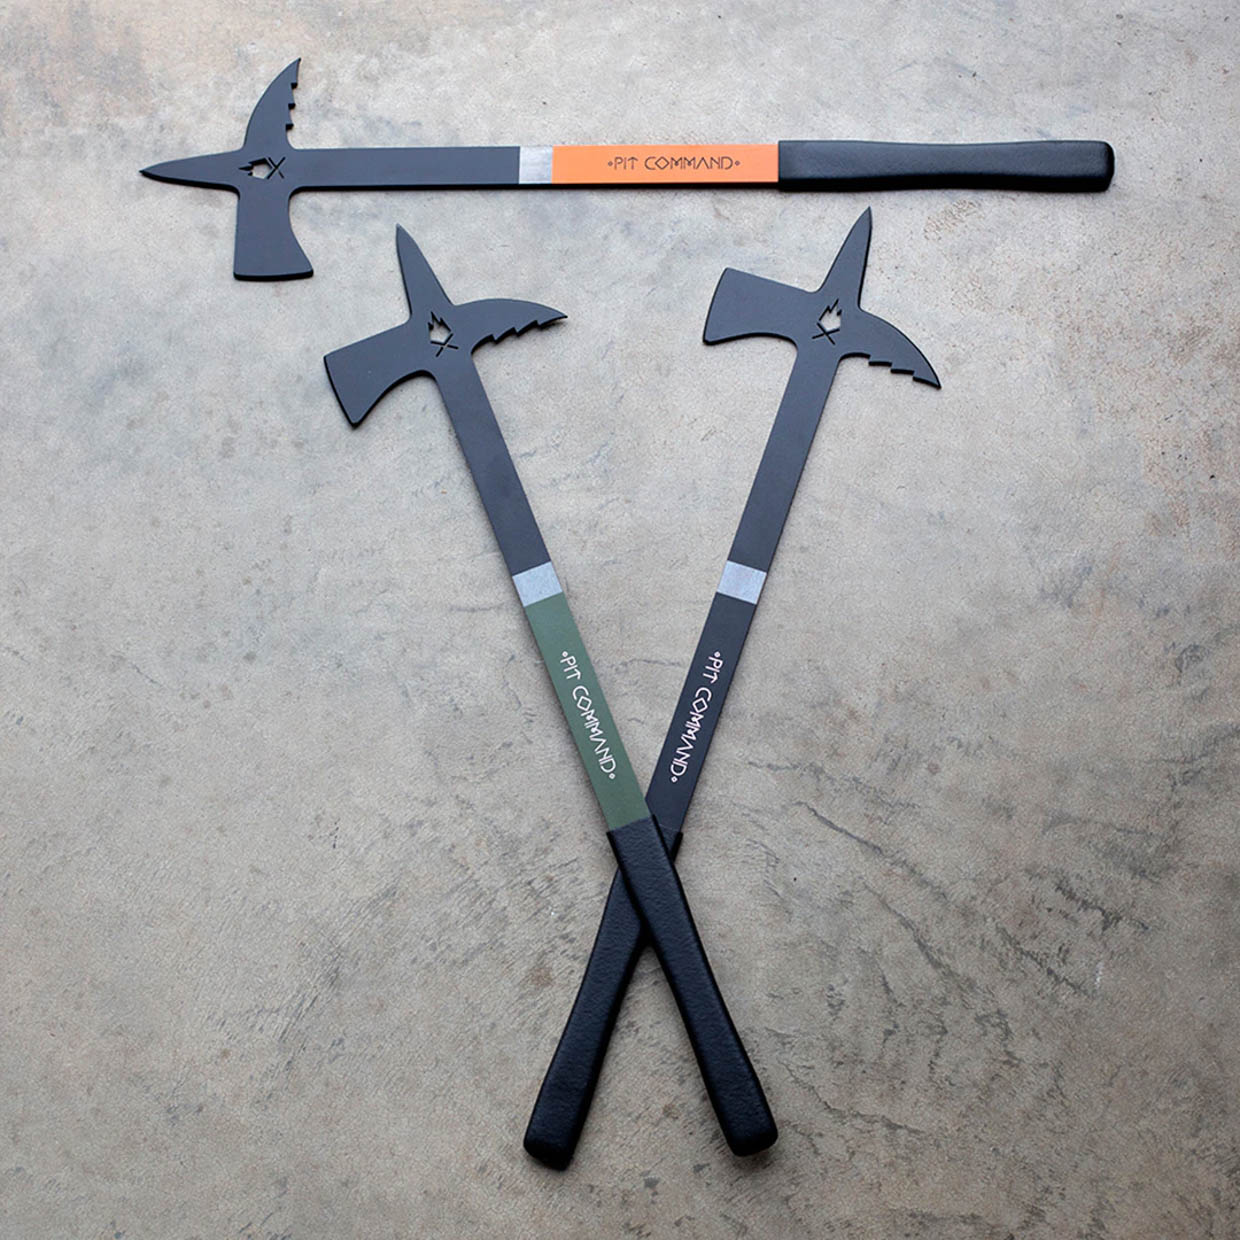 Pit Command Fire Axes